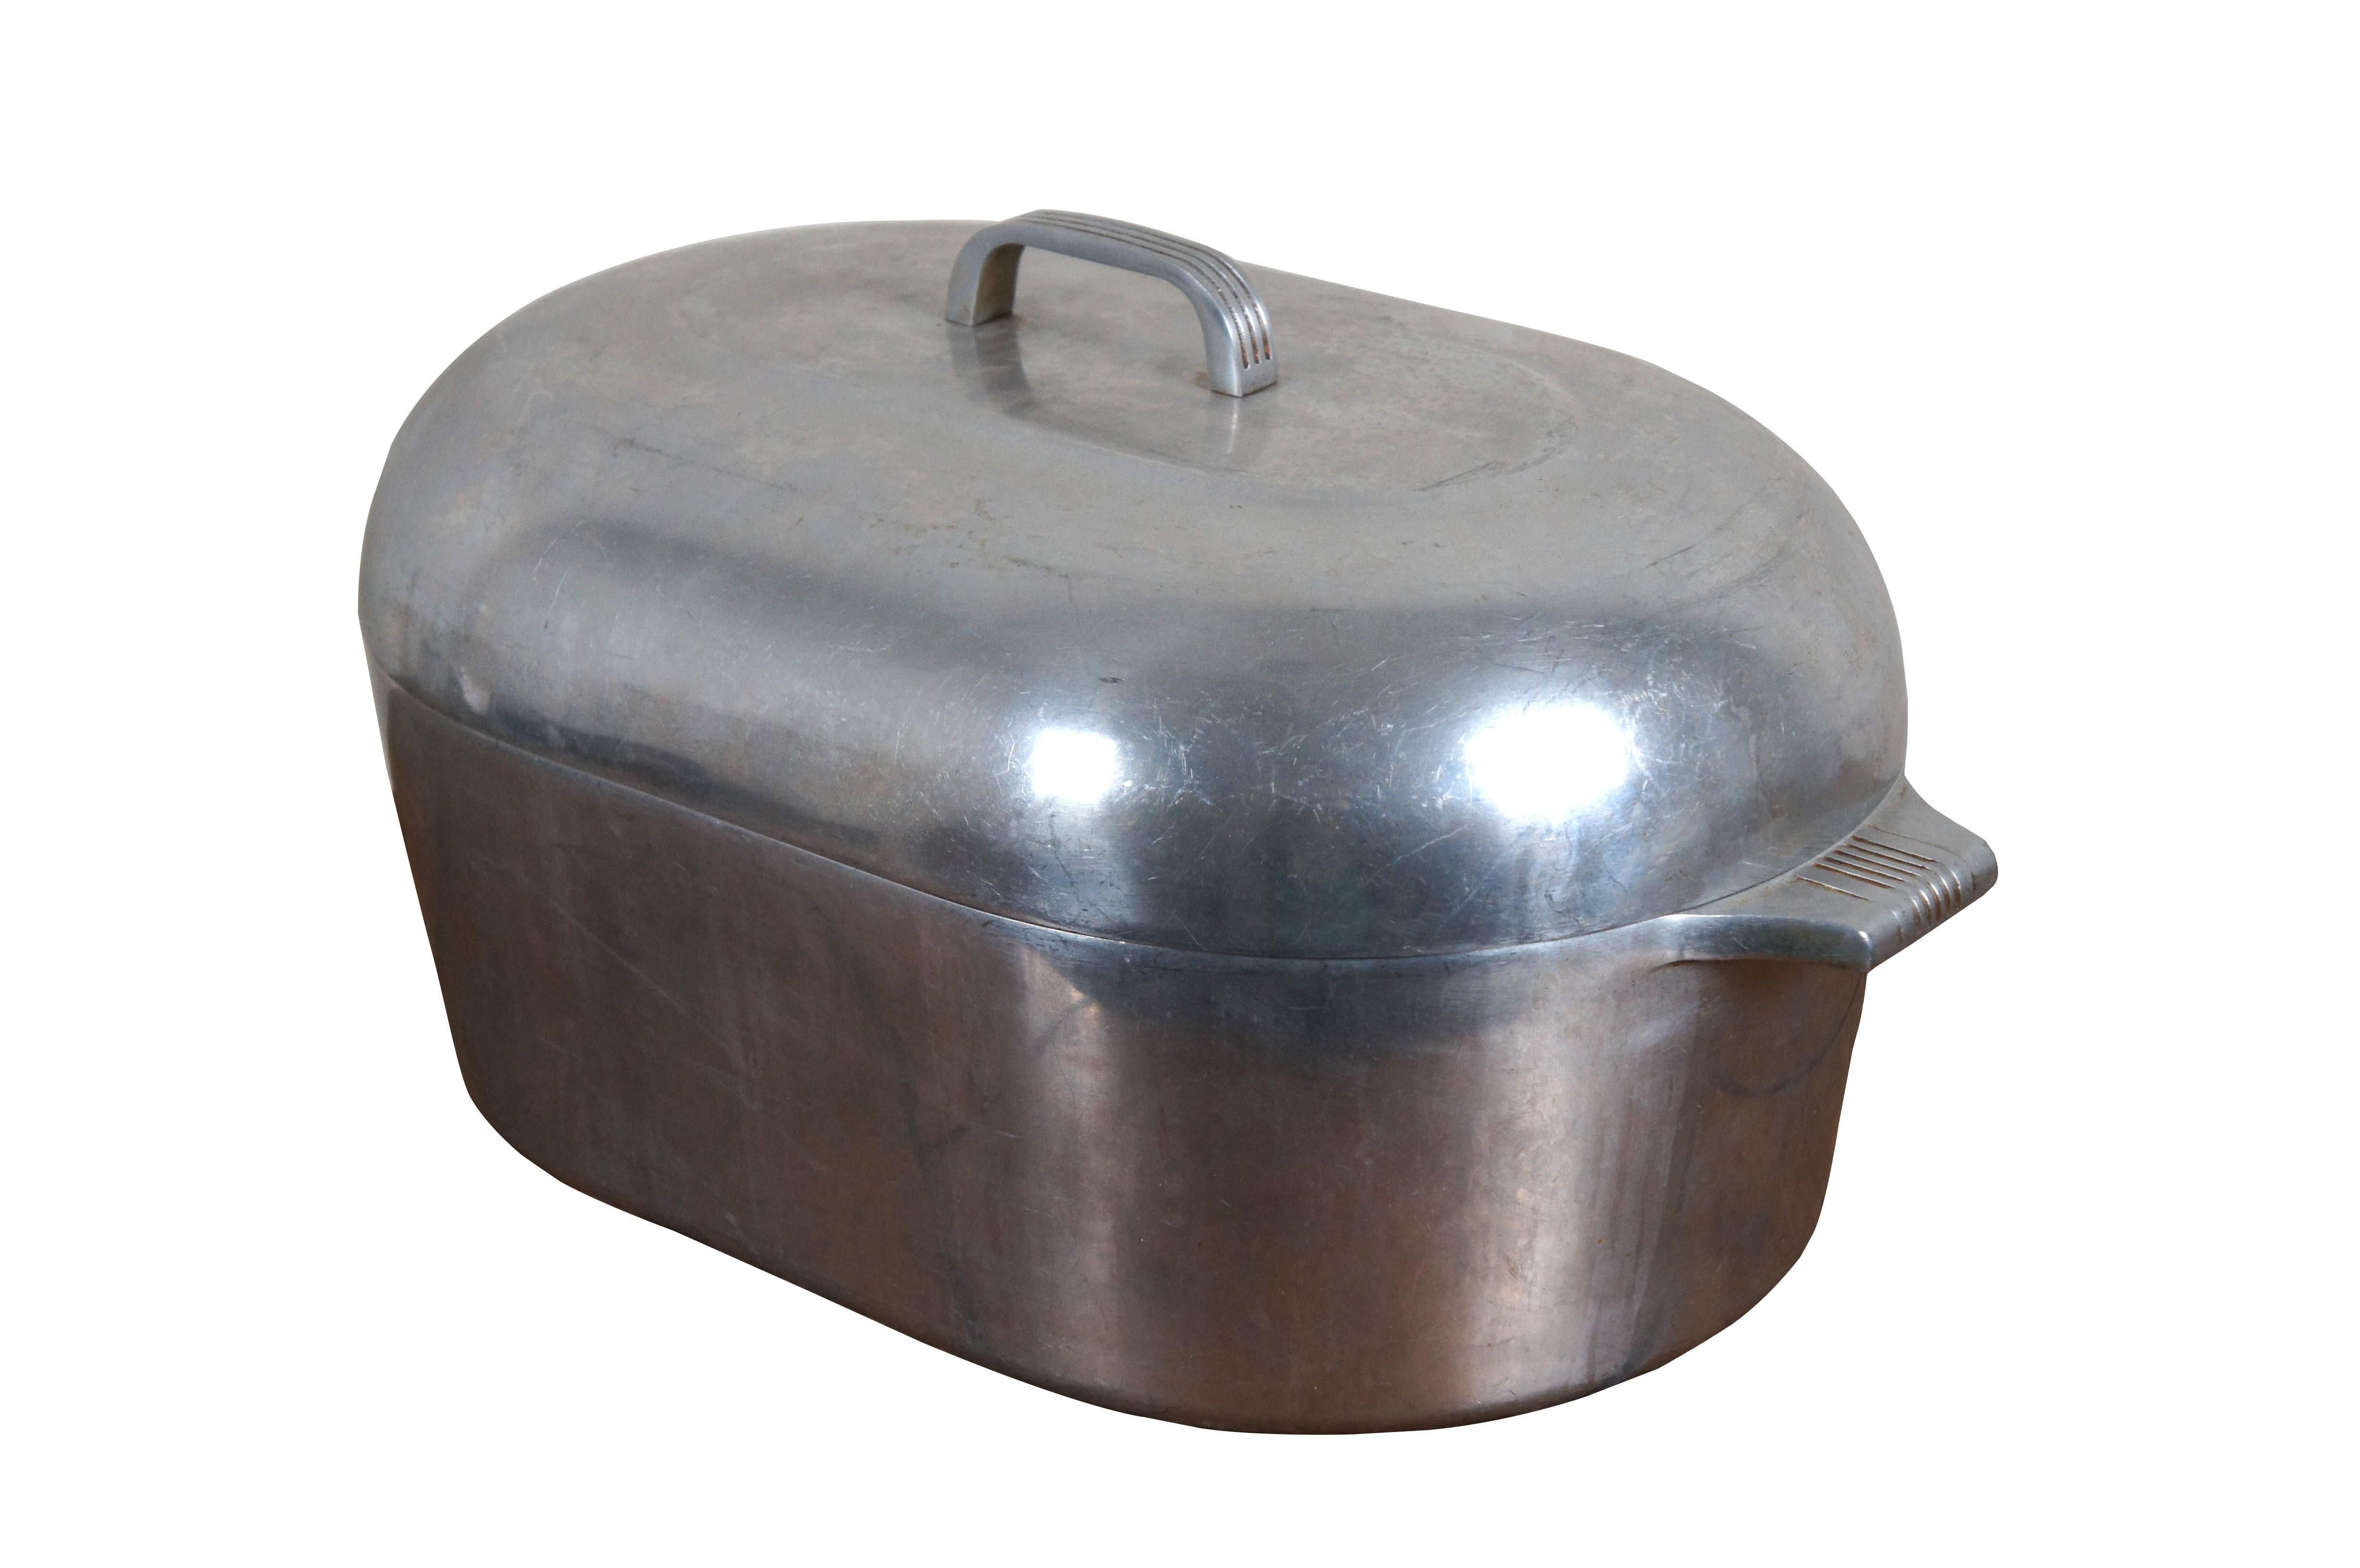 Early to mid 20th century Wagner Ware Magnalite number 4269 extra large, 17 quart aluminum turkey roaster / dutch oven featuring simple art deco styling on the base and lid handles.

